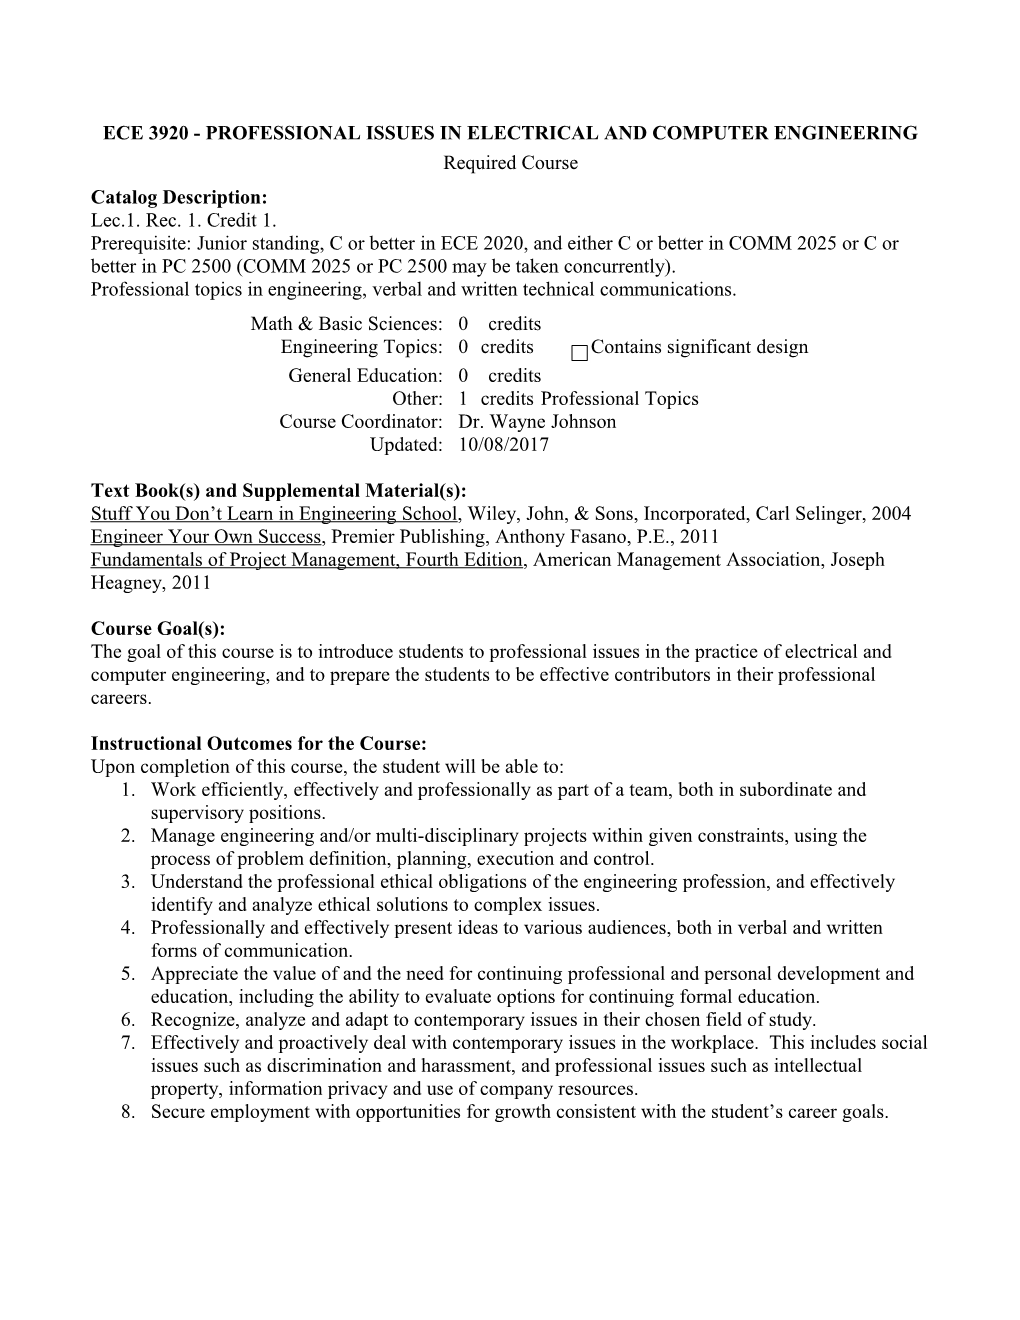 Ece 3920 - Professional Issues in Electrical and Computer Engineering